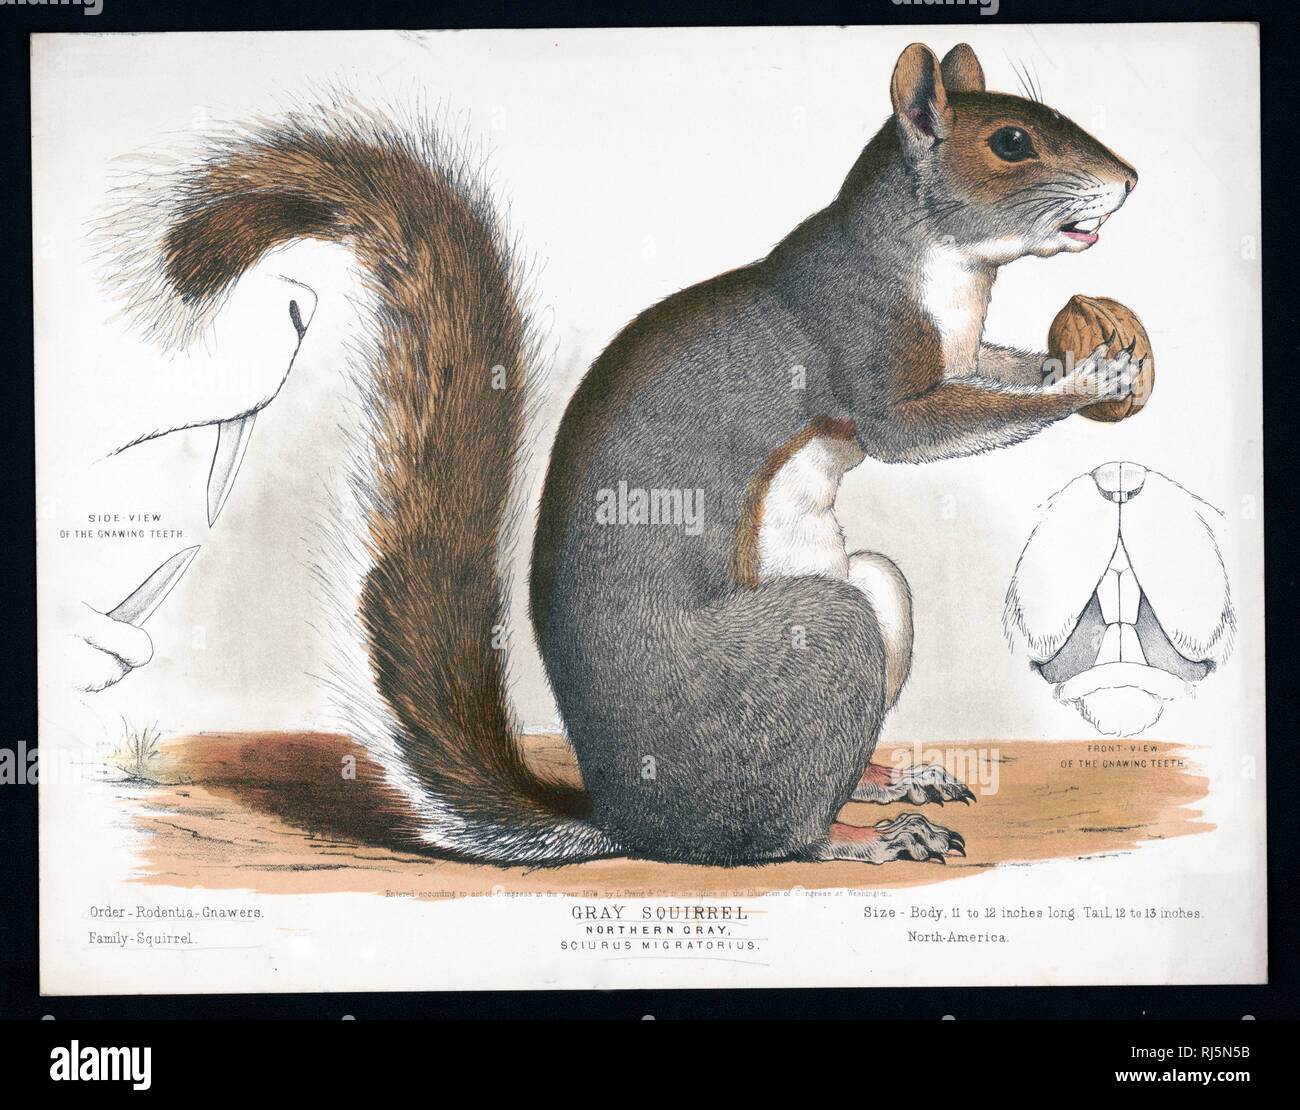 Print shows a right side view of a 'gray squirrel', full-length, sitting up, holding a walnut between its paws; also shows, on the left, a 'side view of the gnawing teeth' and, on the right, a 'front view of the gnawing teeth'. Stock Photo